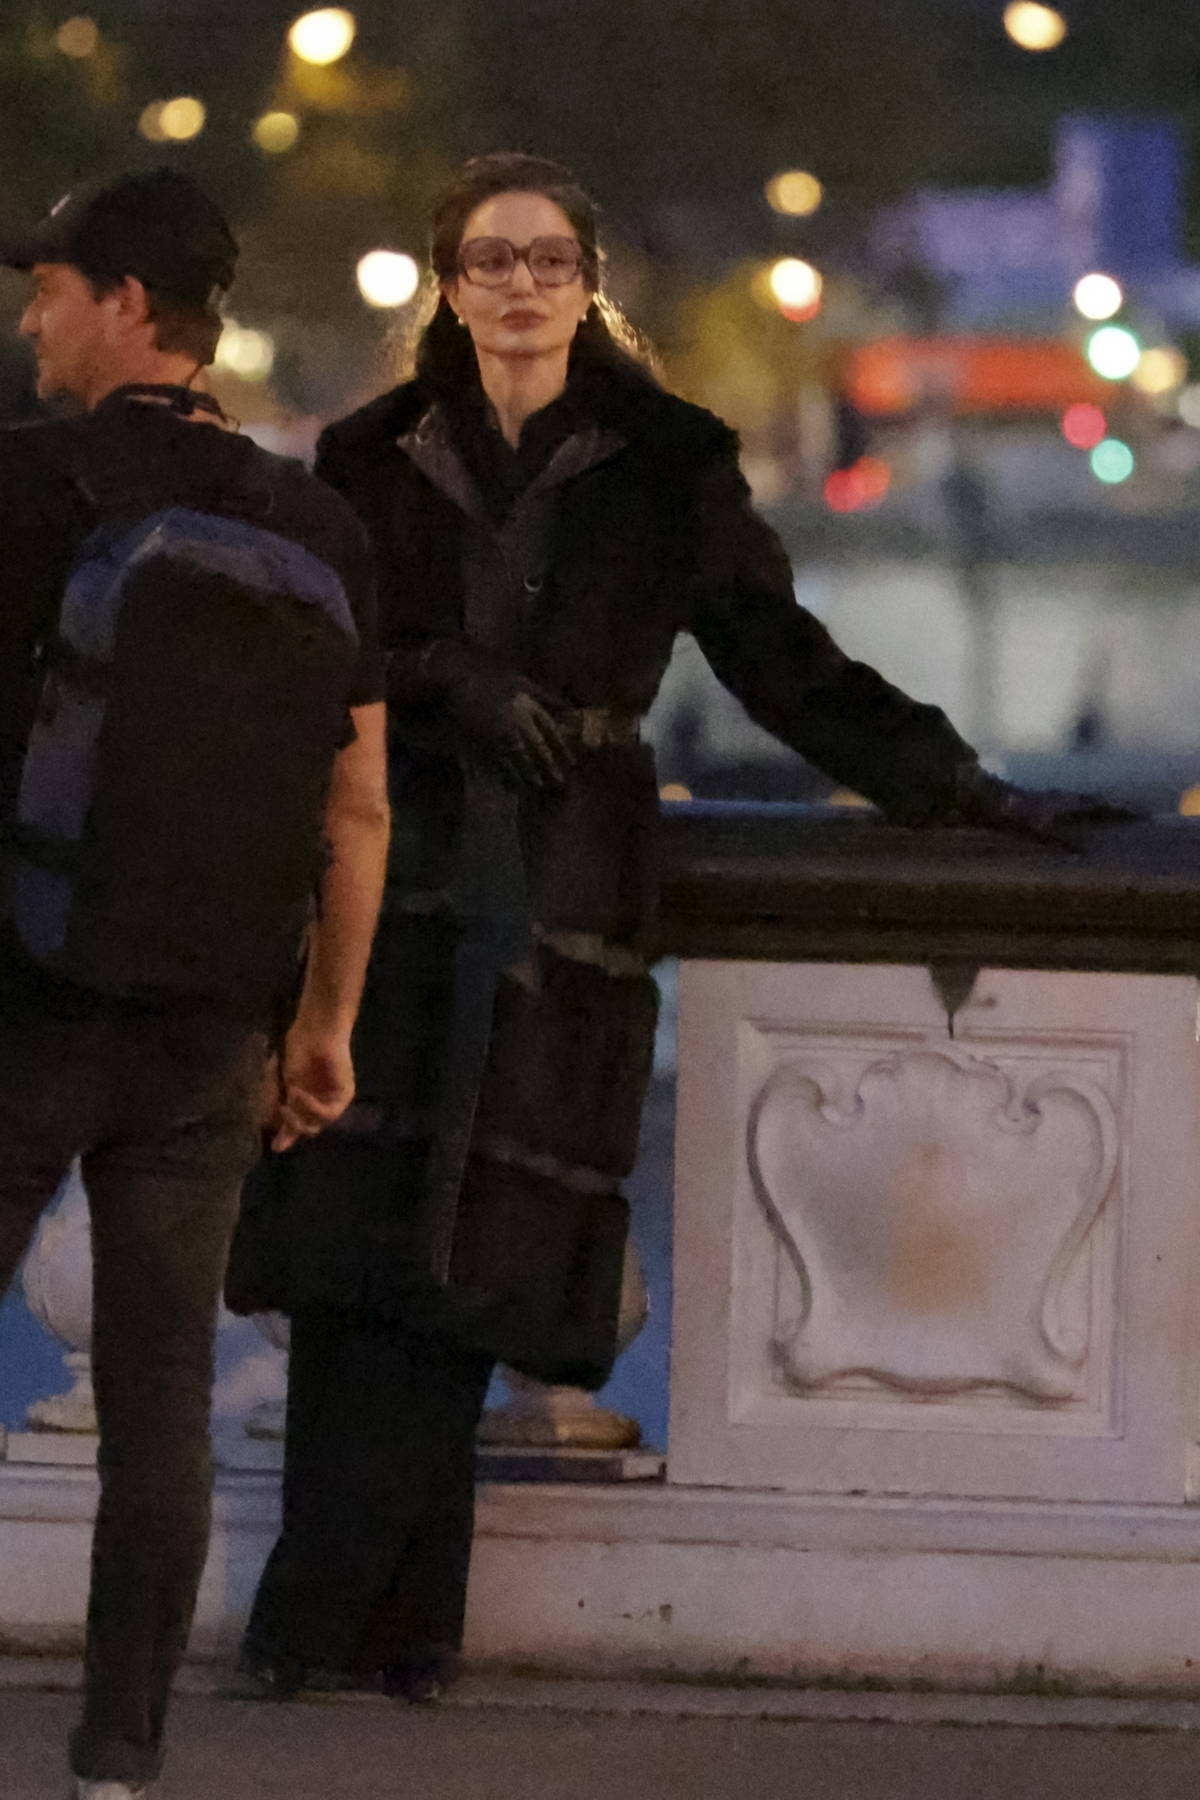 Angelina Jolie seen filming for her upcoming film 'Maria' on the Alexandre 3 bridge in Paris, France